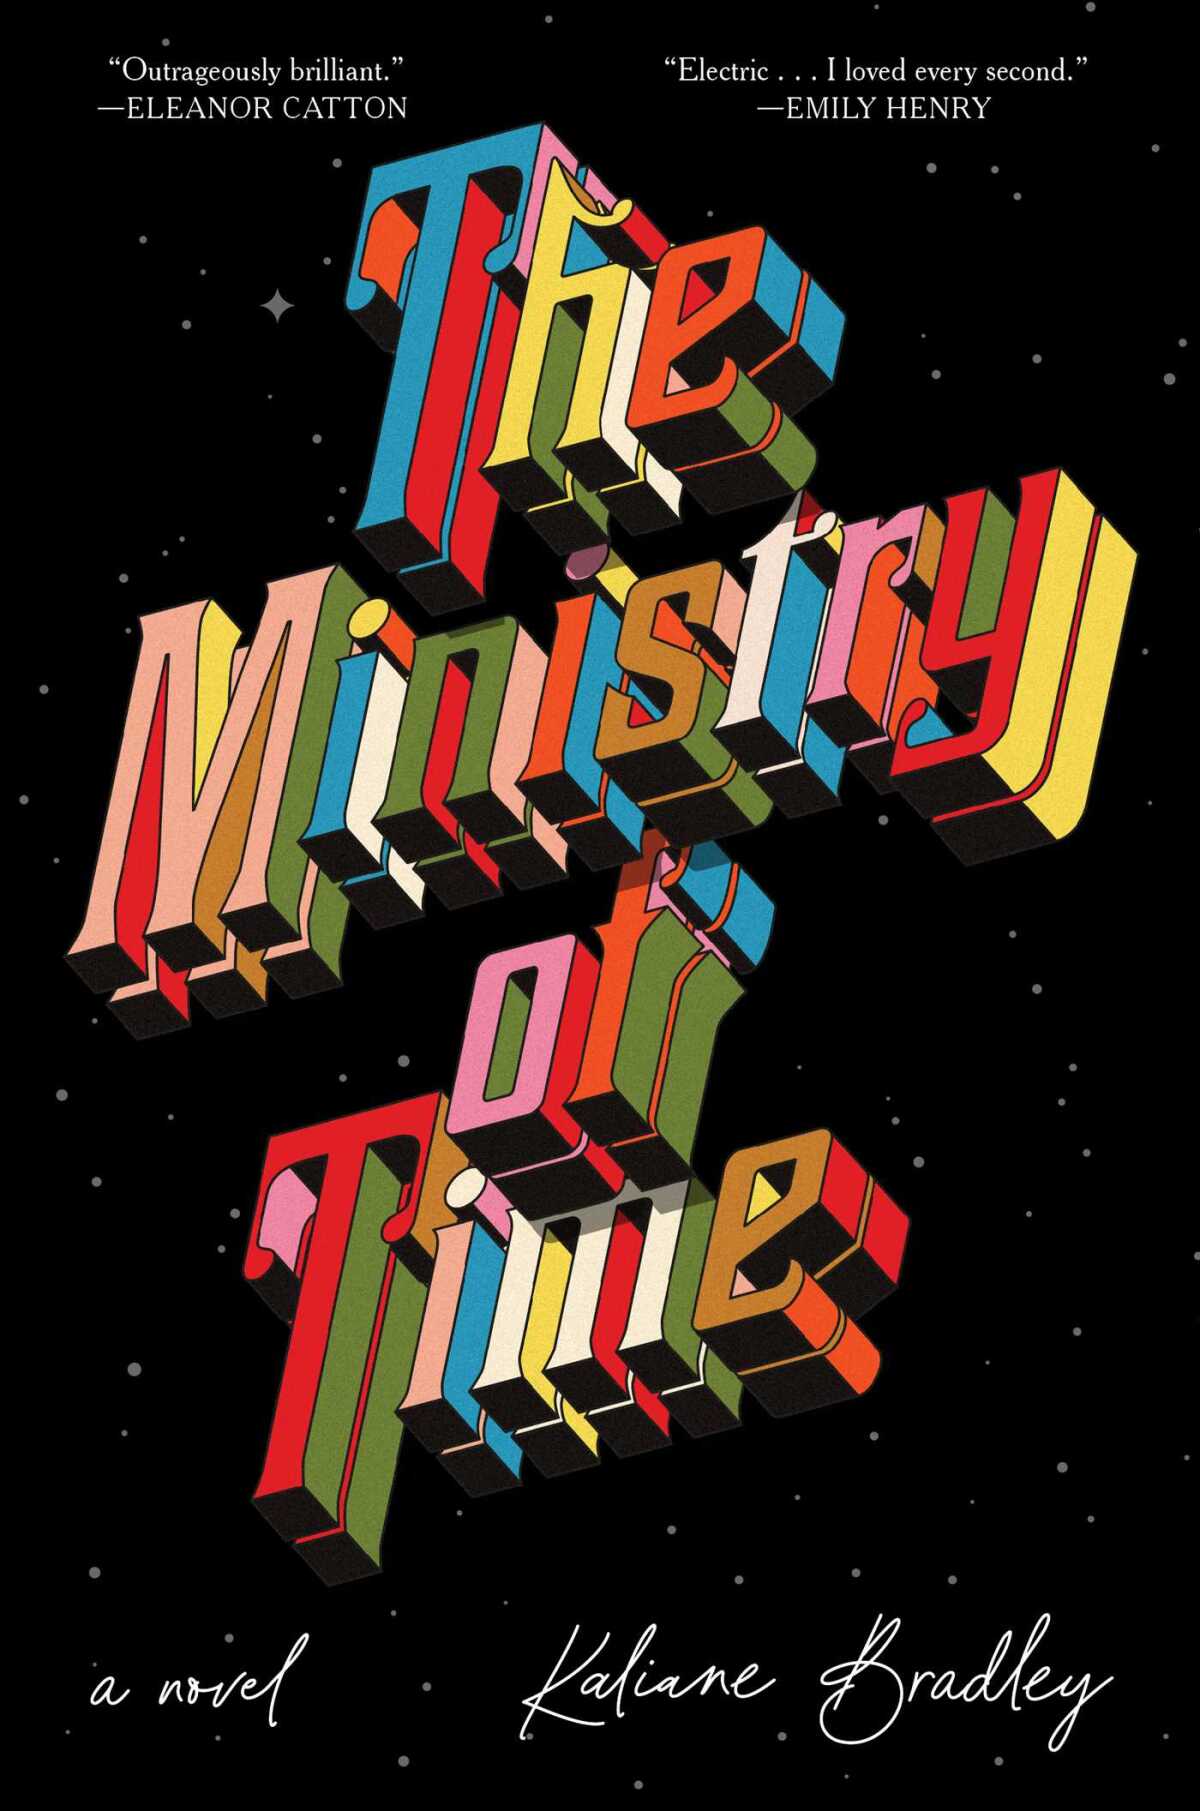 The Ministry of Time cover with the title in 3-D in many colors against a dark background